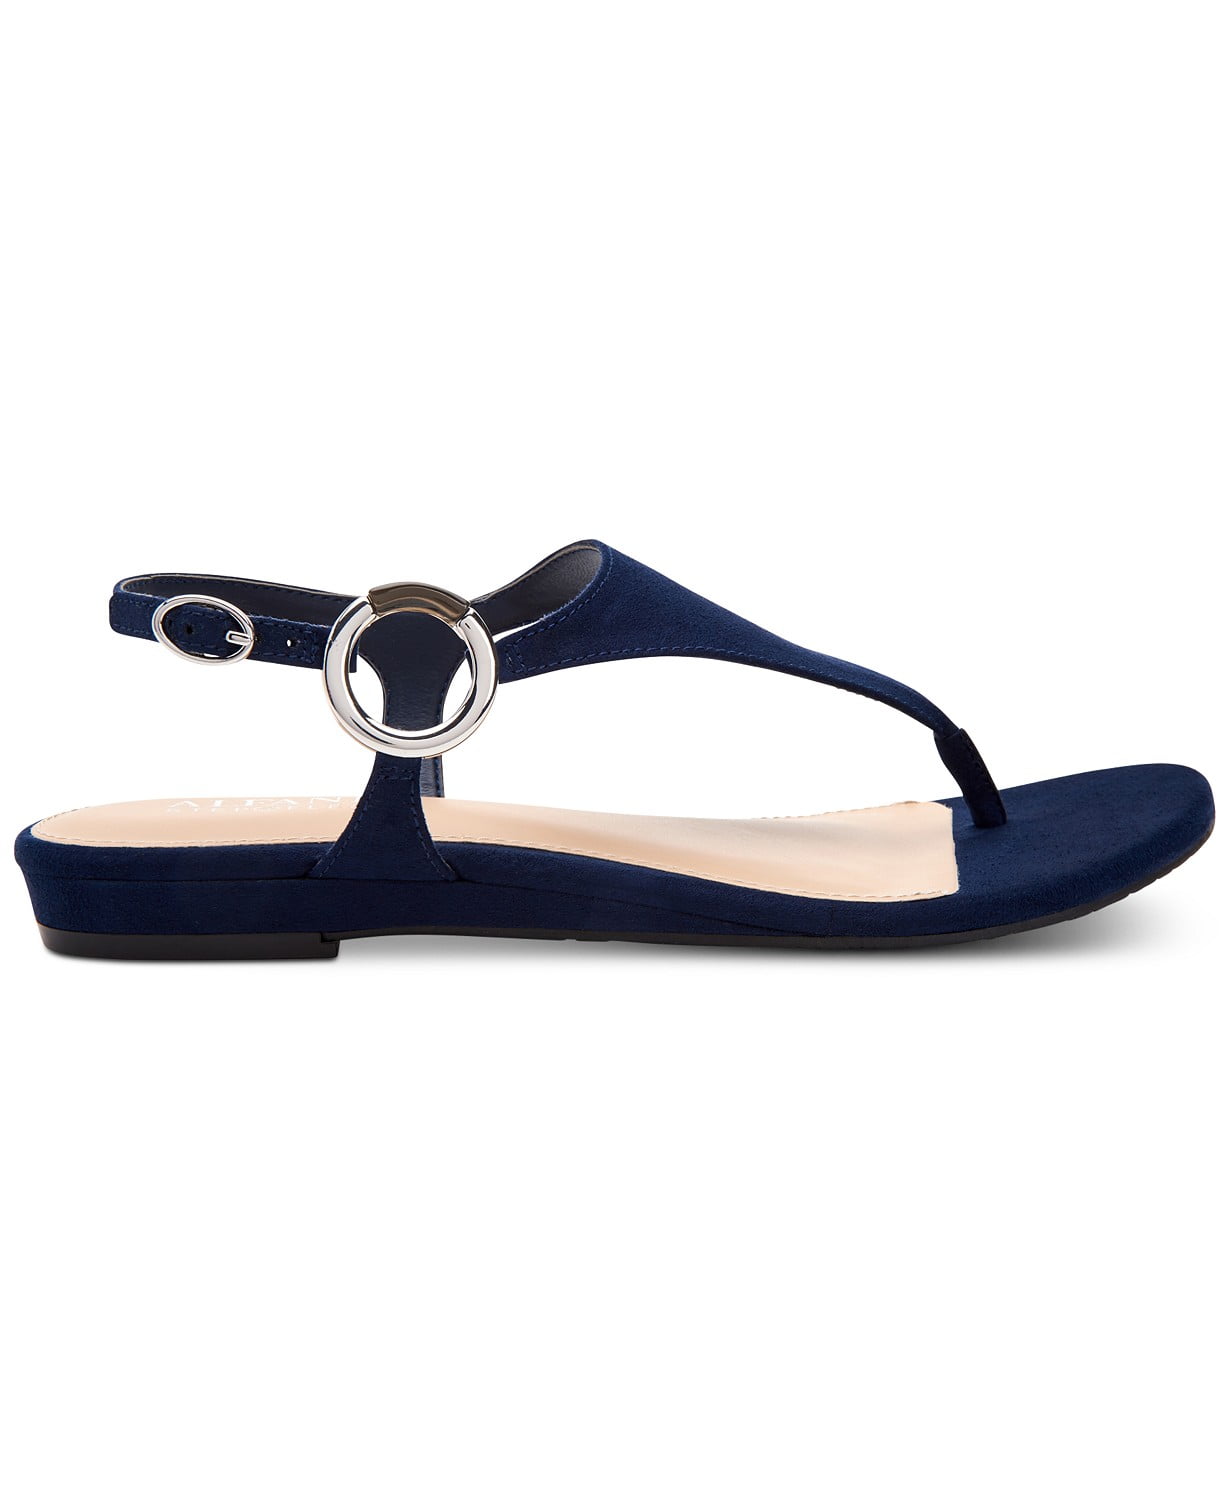 www.couturepoint.com-alfani-womens-navy-hayyden-hooded-thong-sandals